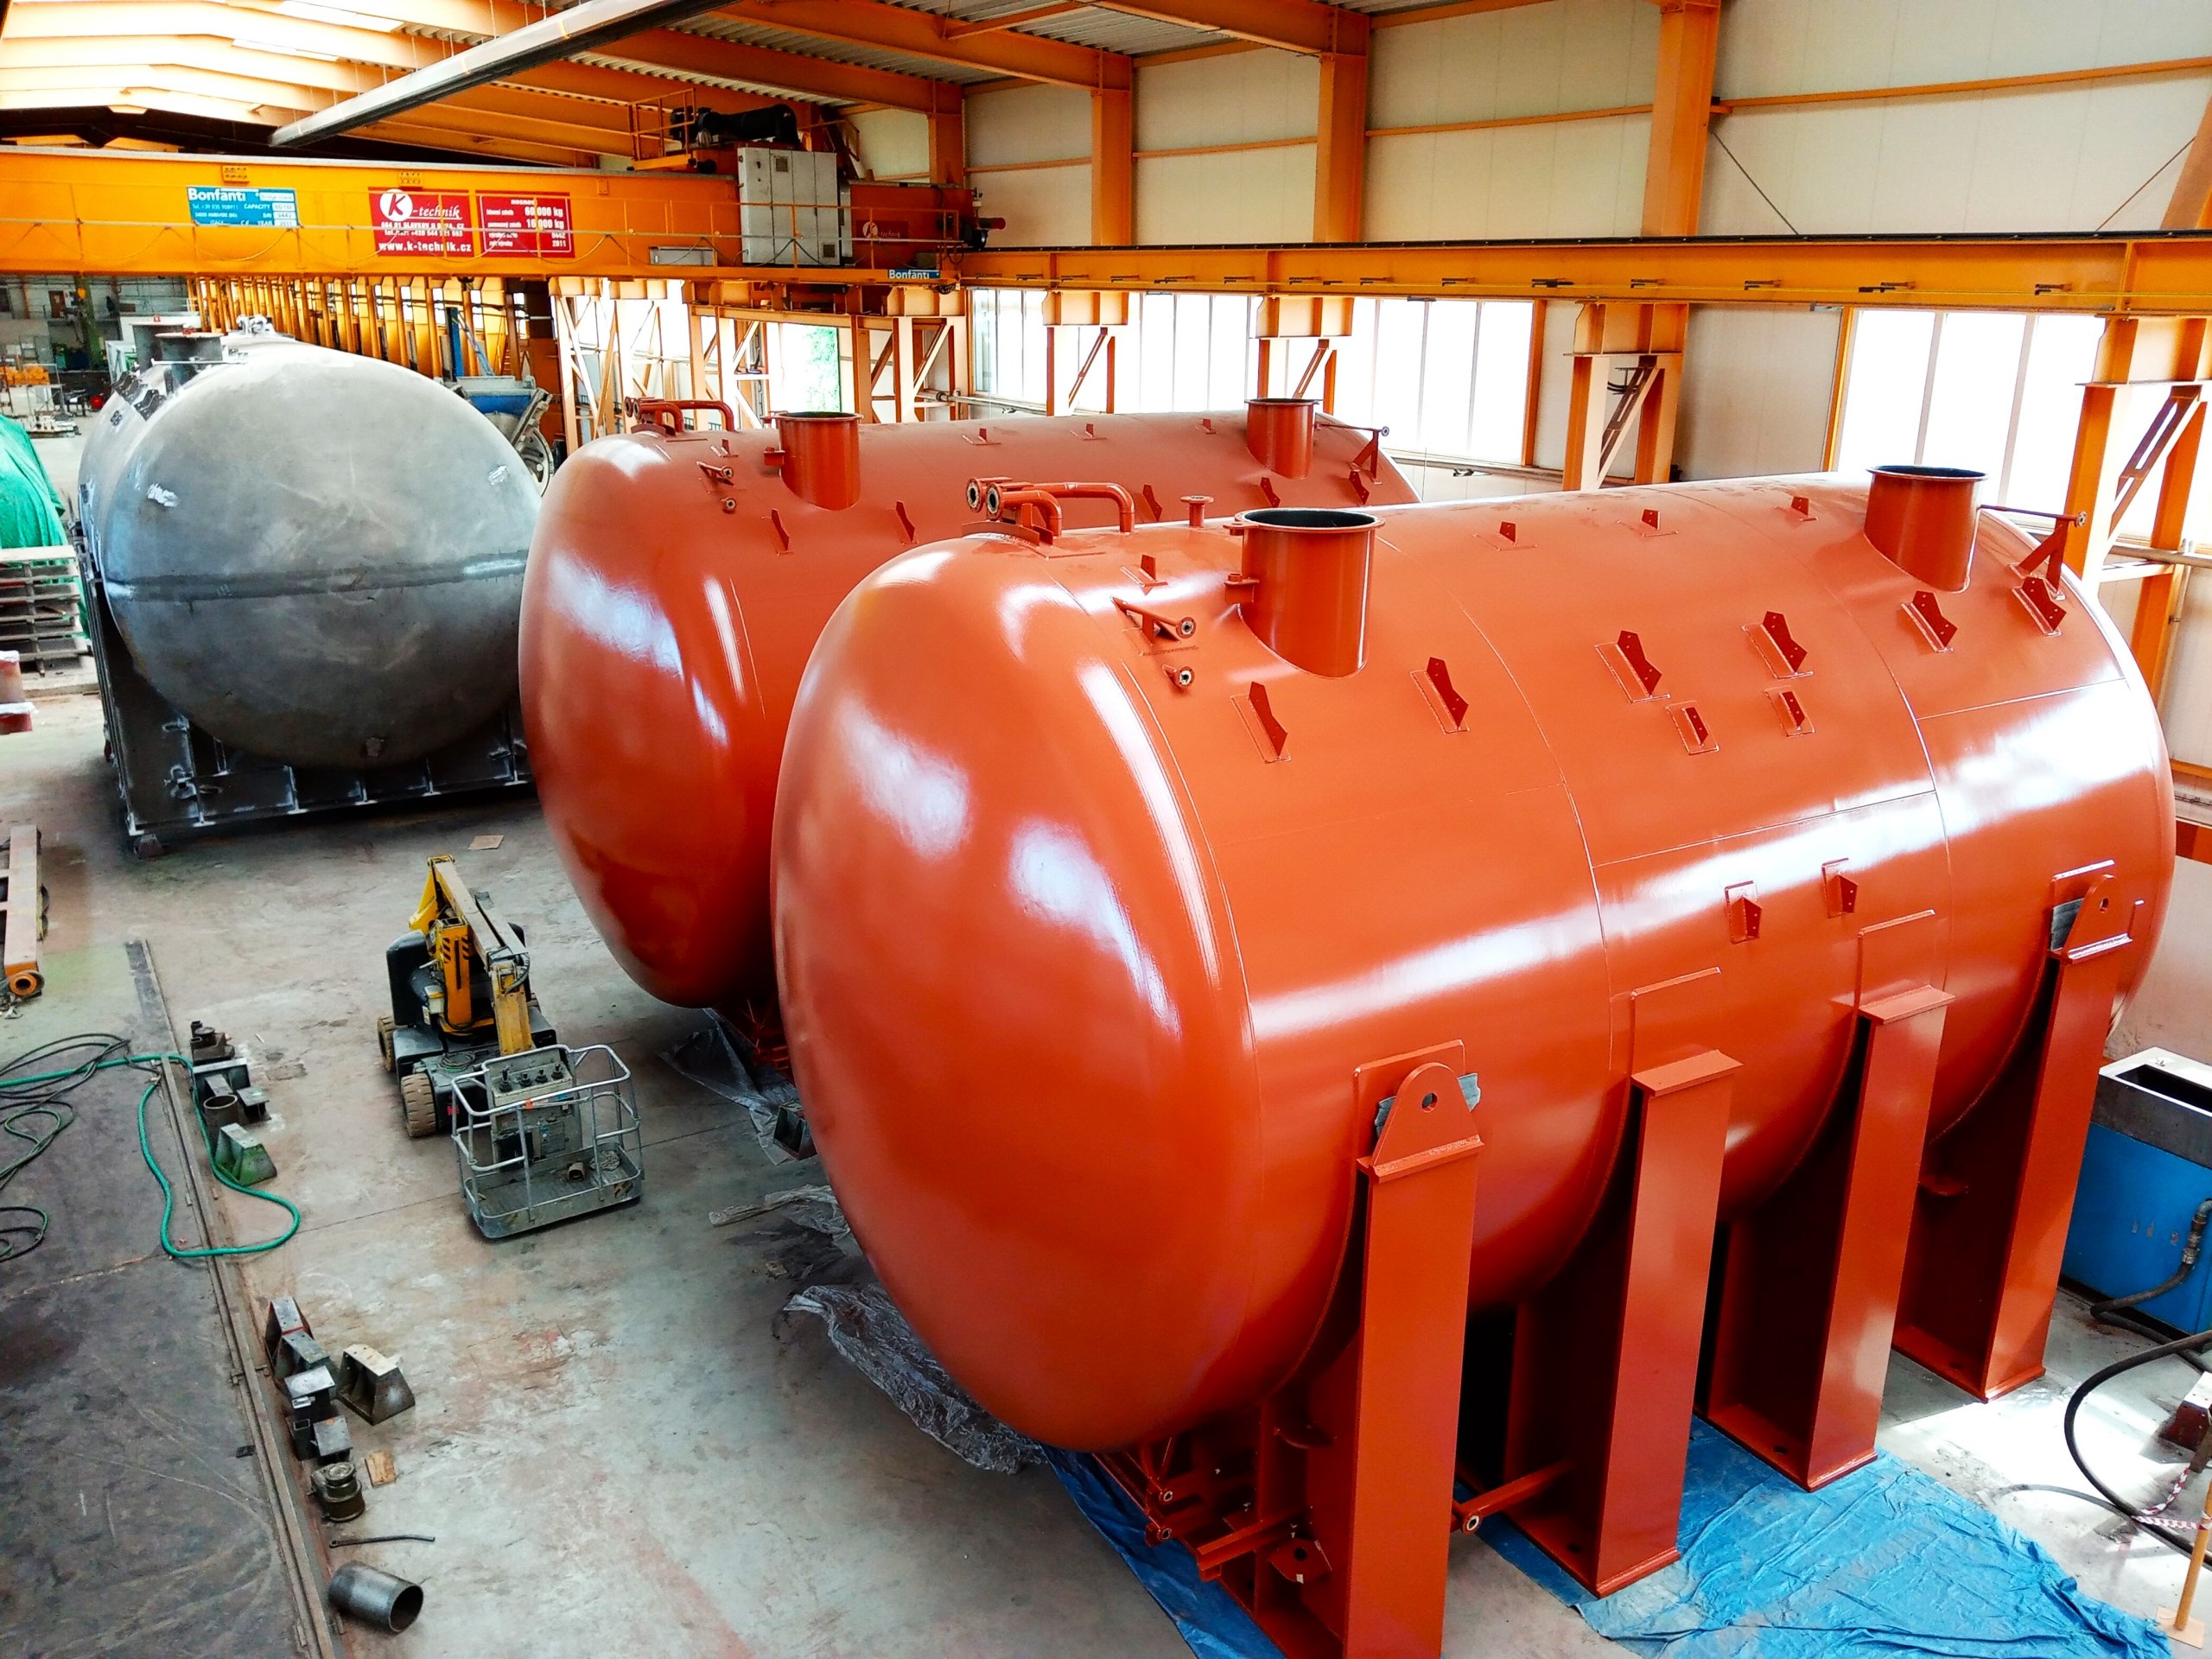 MICo has shipped the final delivery of storage tanks for the construction of a nuclear power plant in the UK